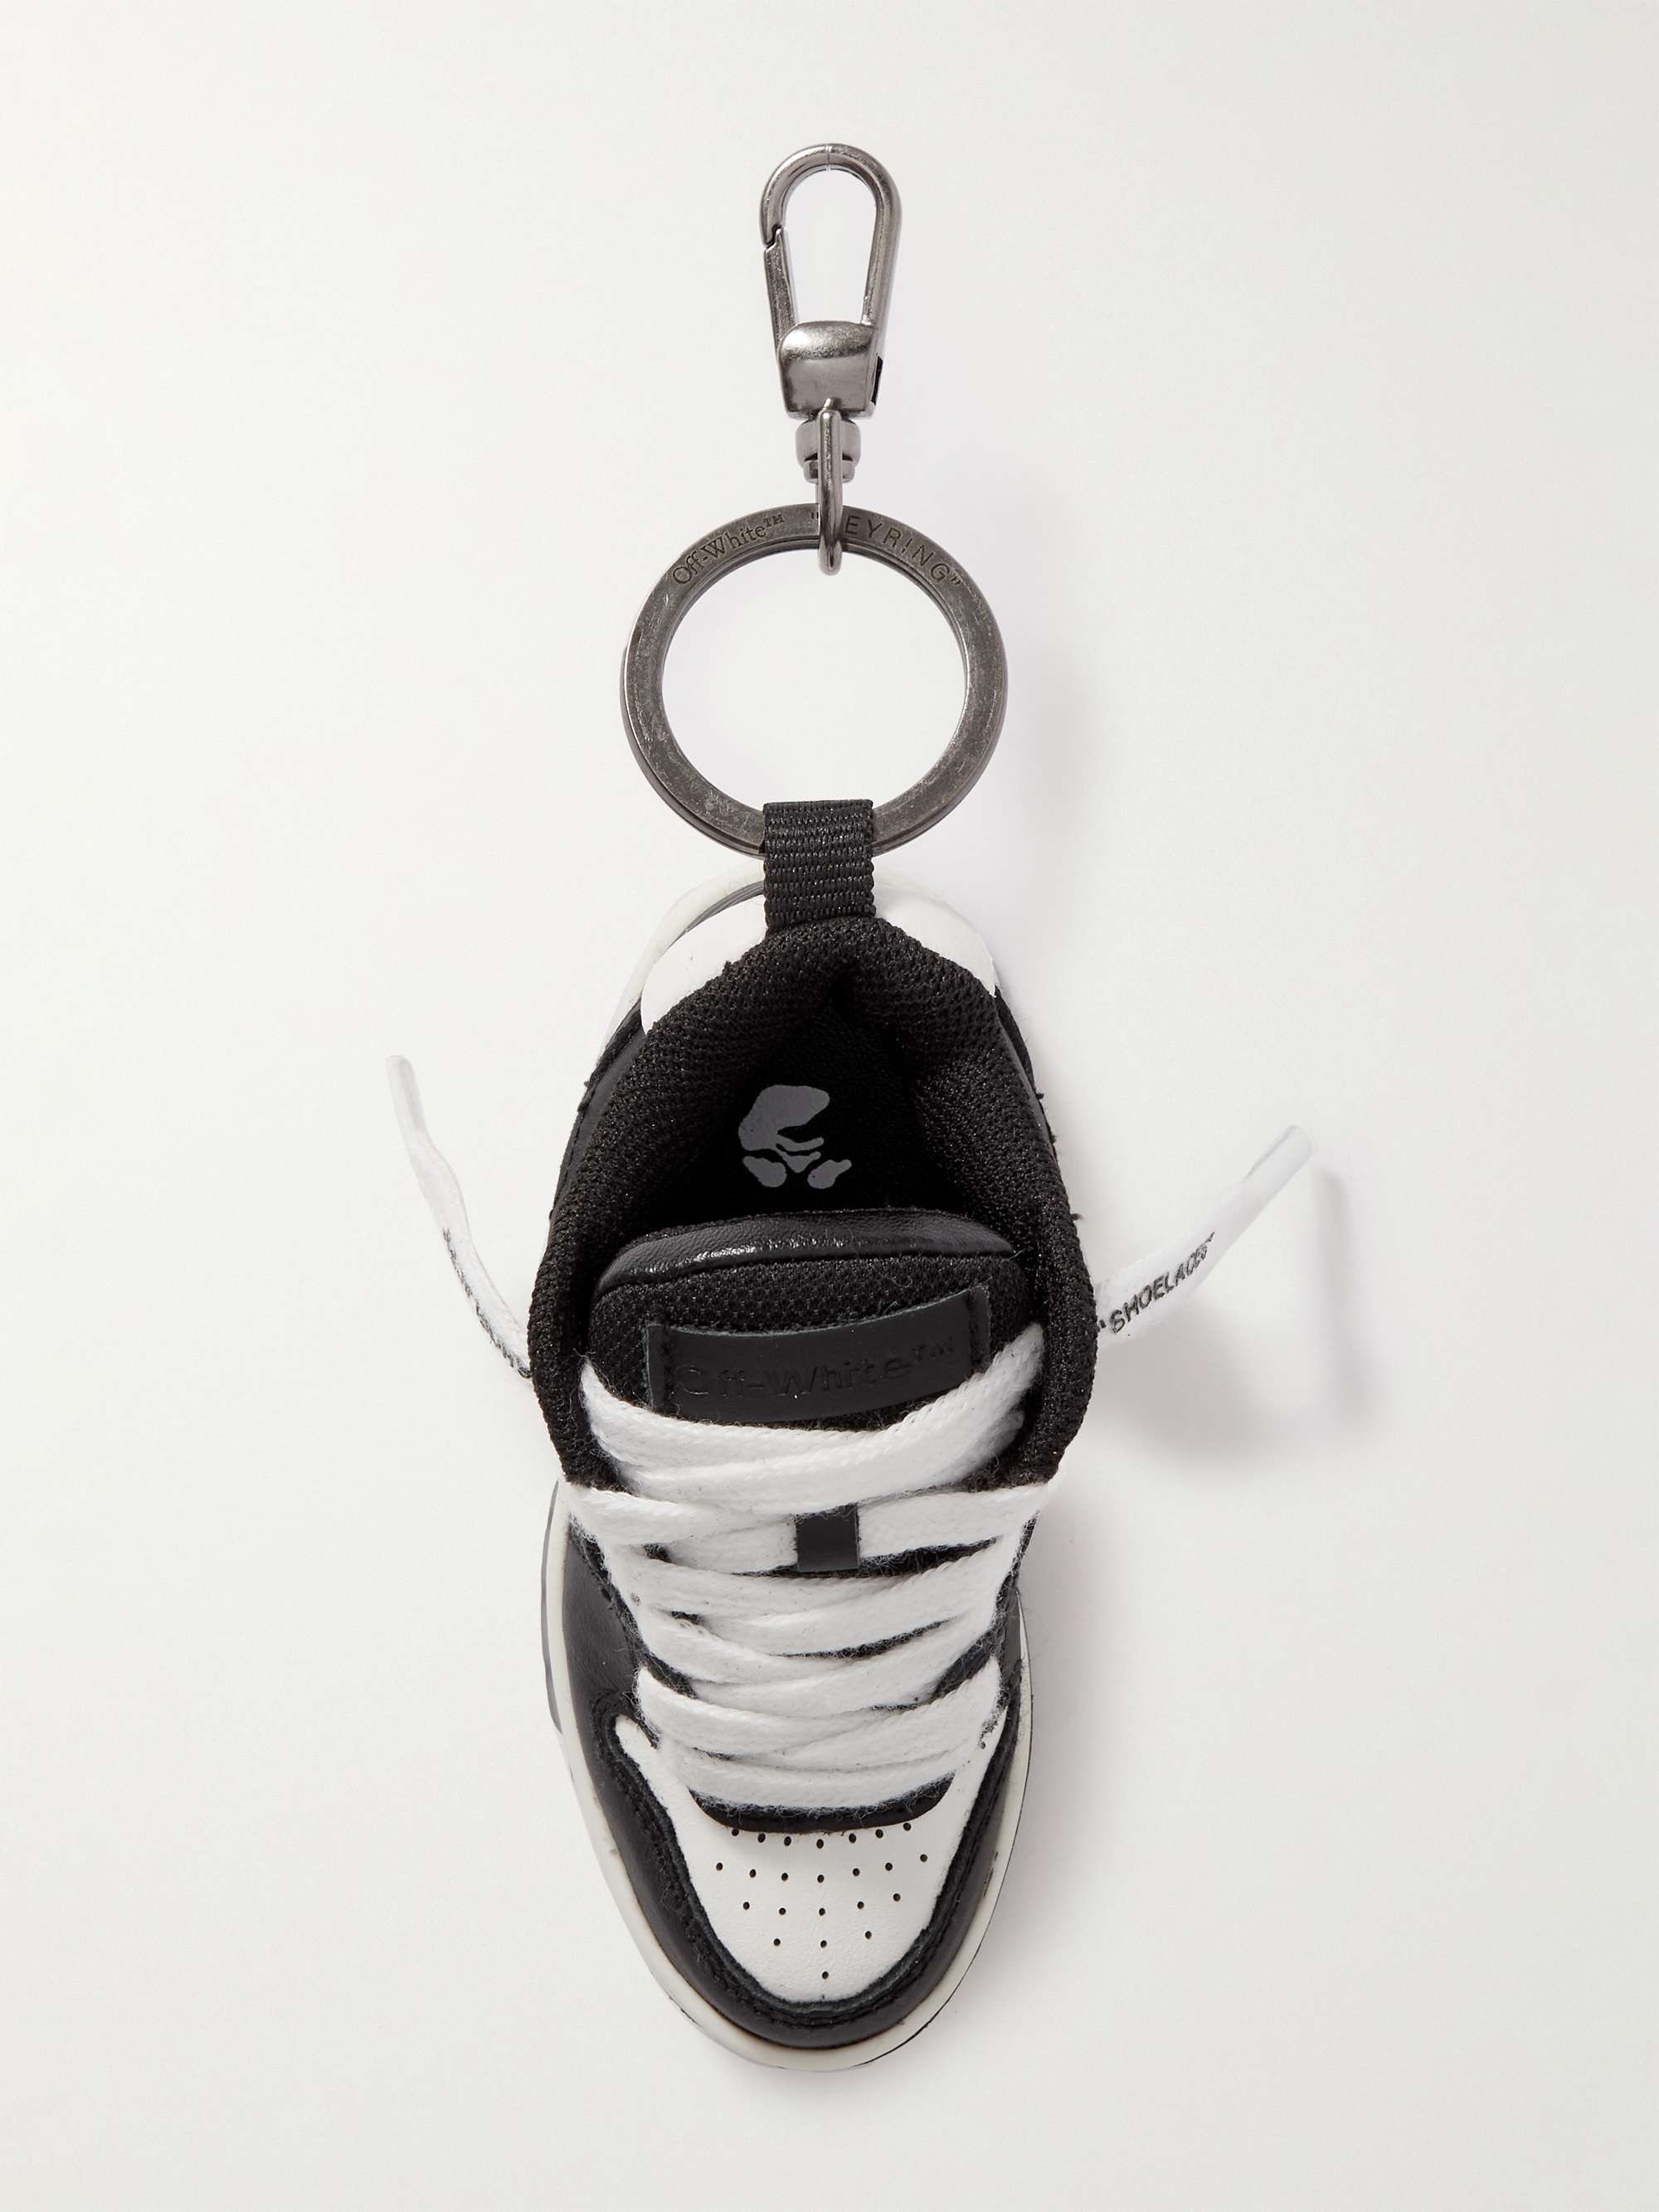 OFF-WHITE OOO Leather Key Ring